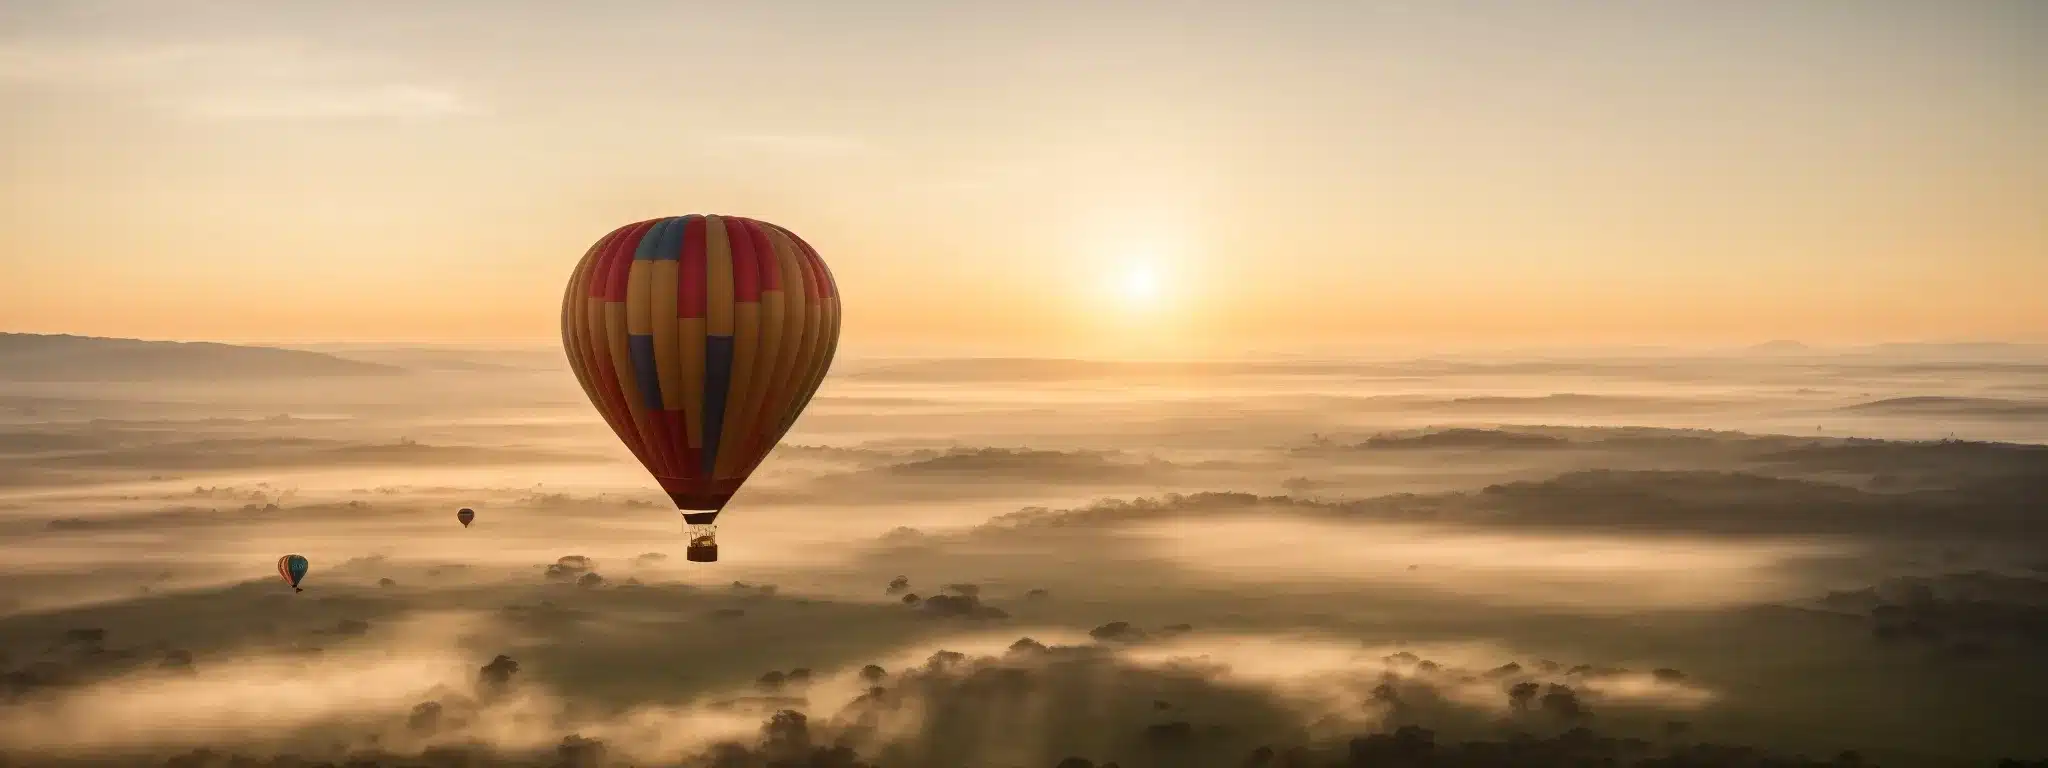 A Soaring Hot Air Balloon With A Blank Canvas Gliding Over A Tranquil Landscape At Sunrise Symbolizes The Rise Of Brand Awareness.